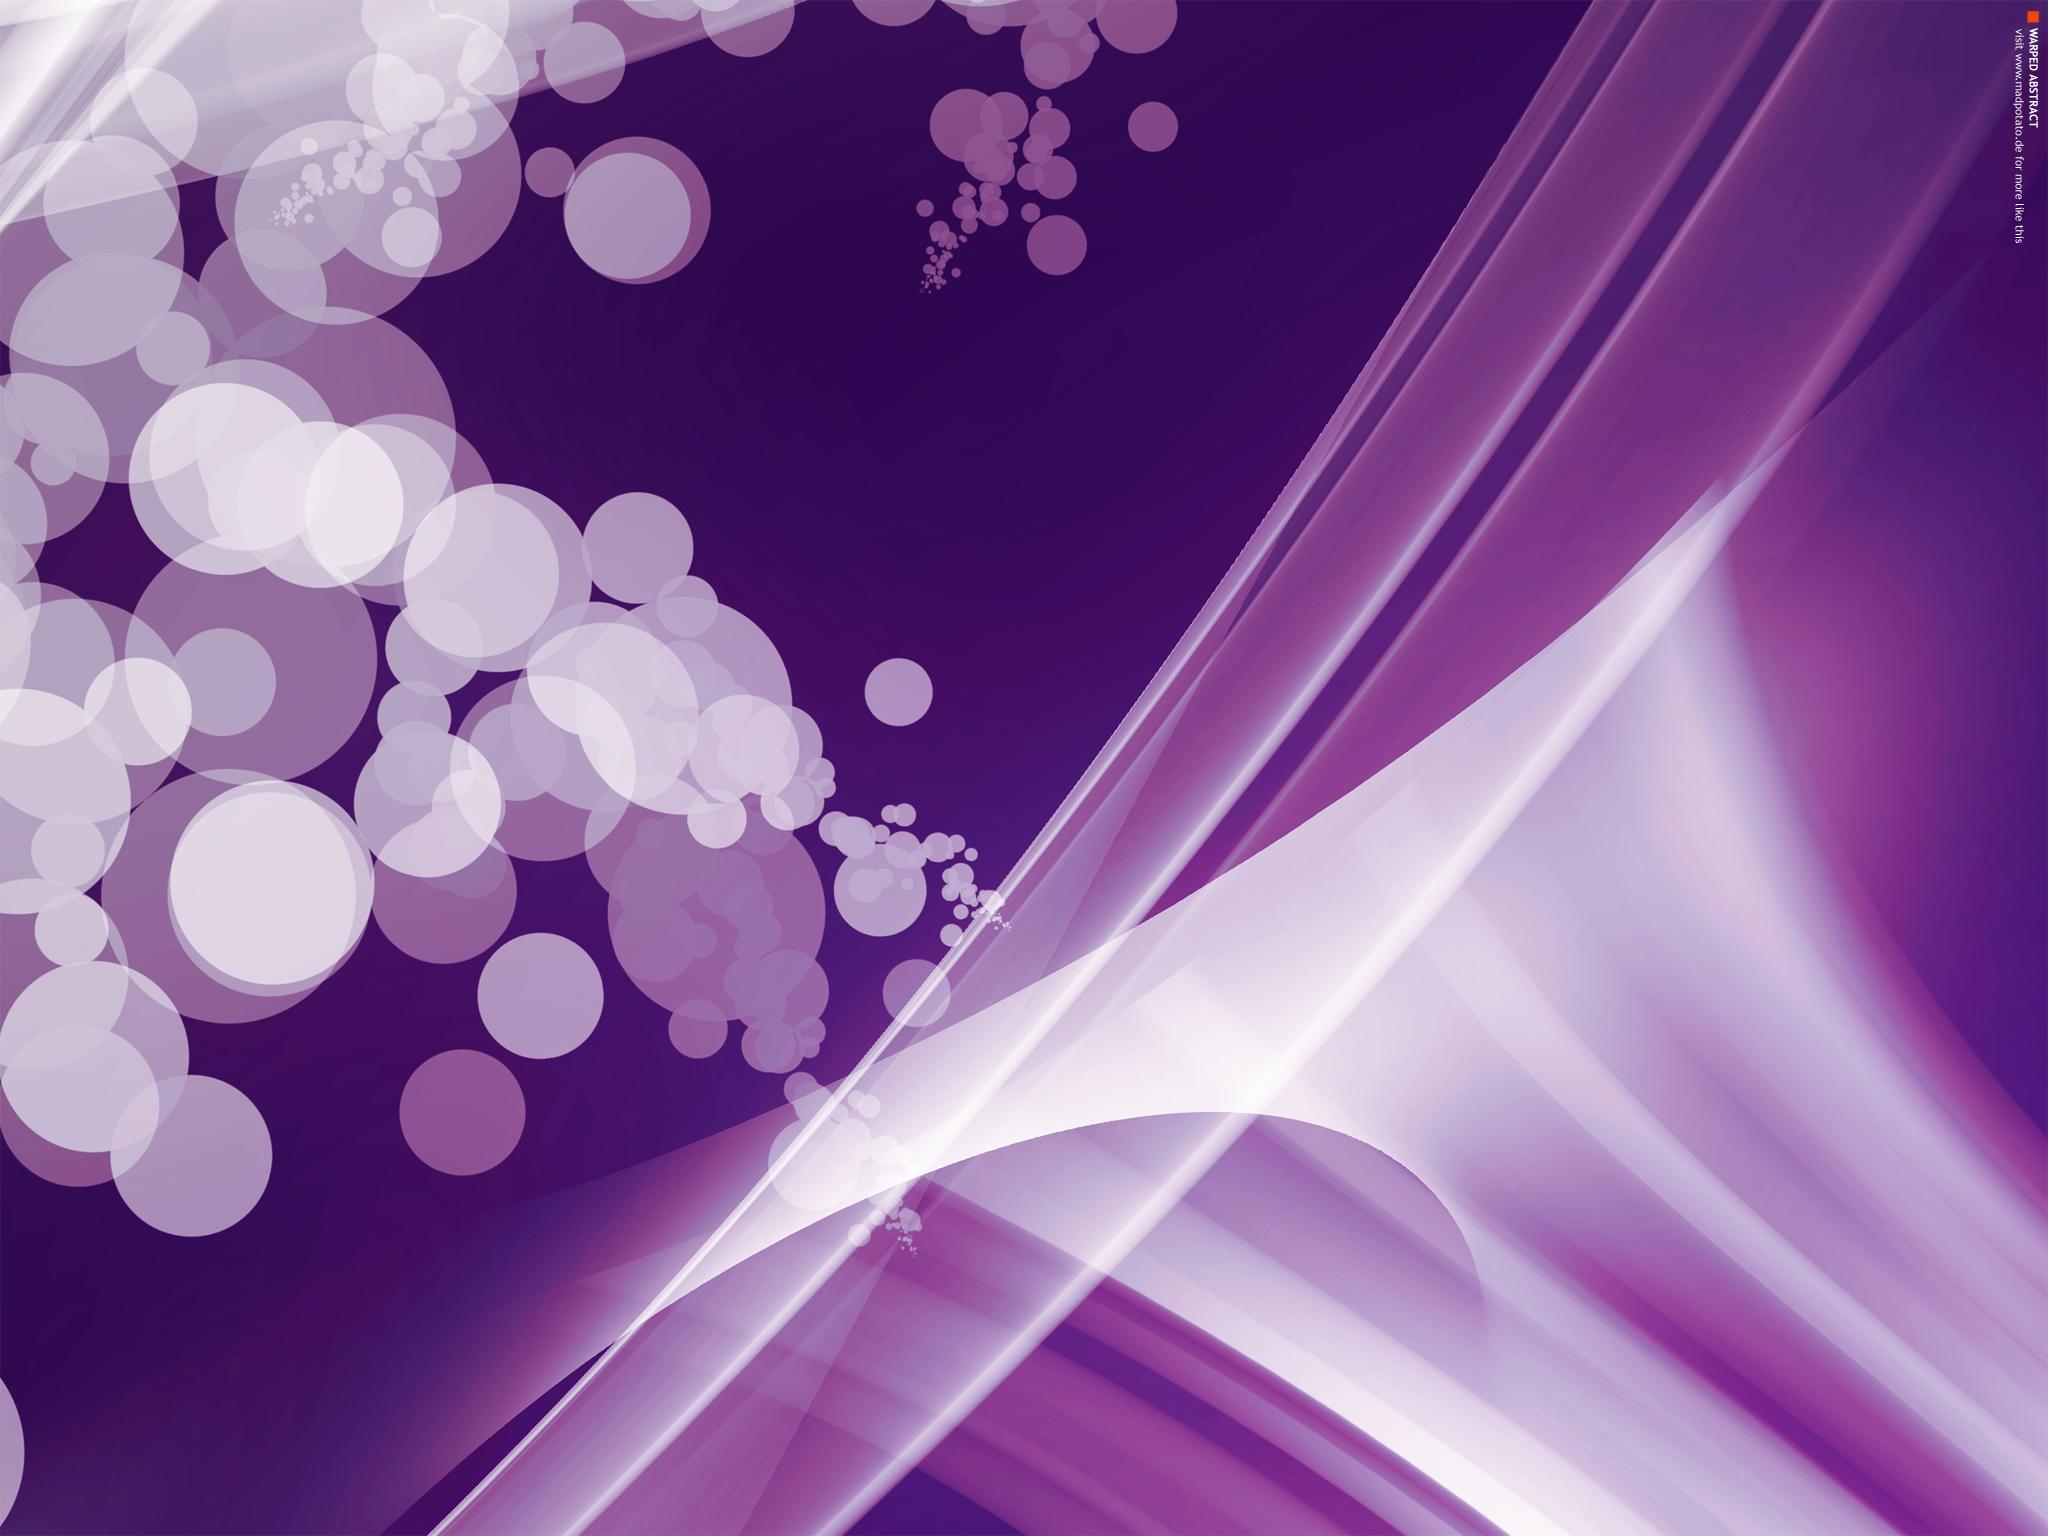 Purple Image HD Backgrounds For PC taken from Abstract Animated